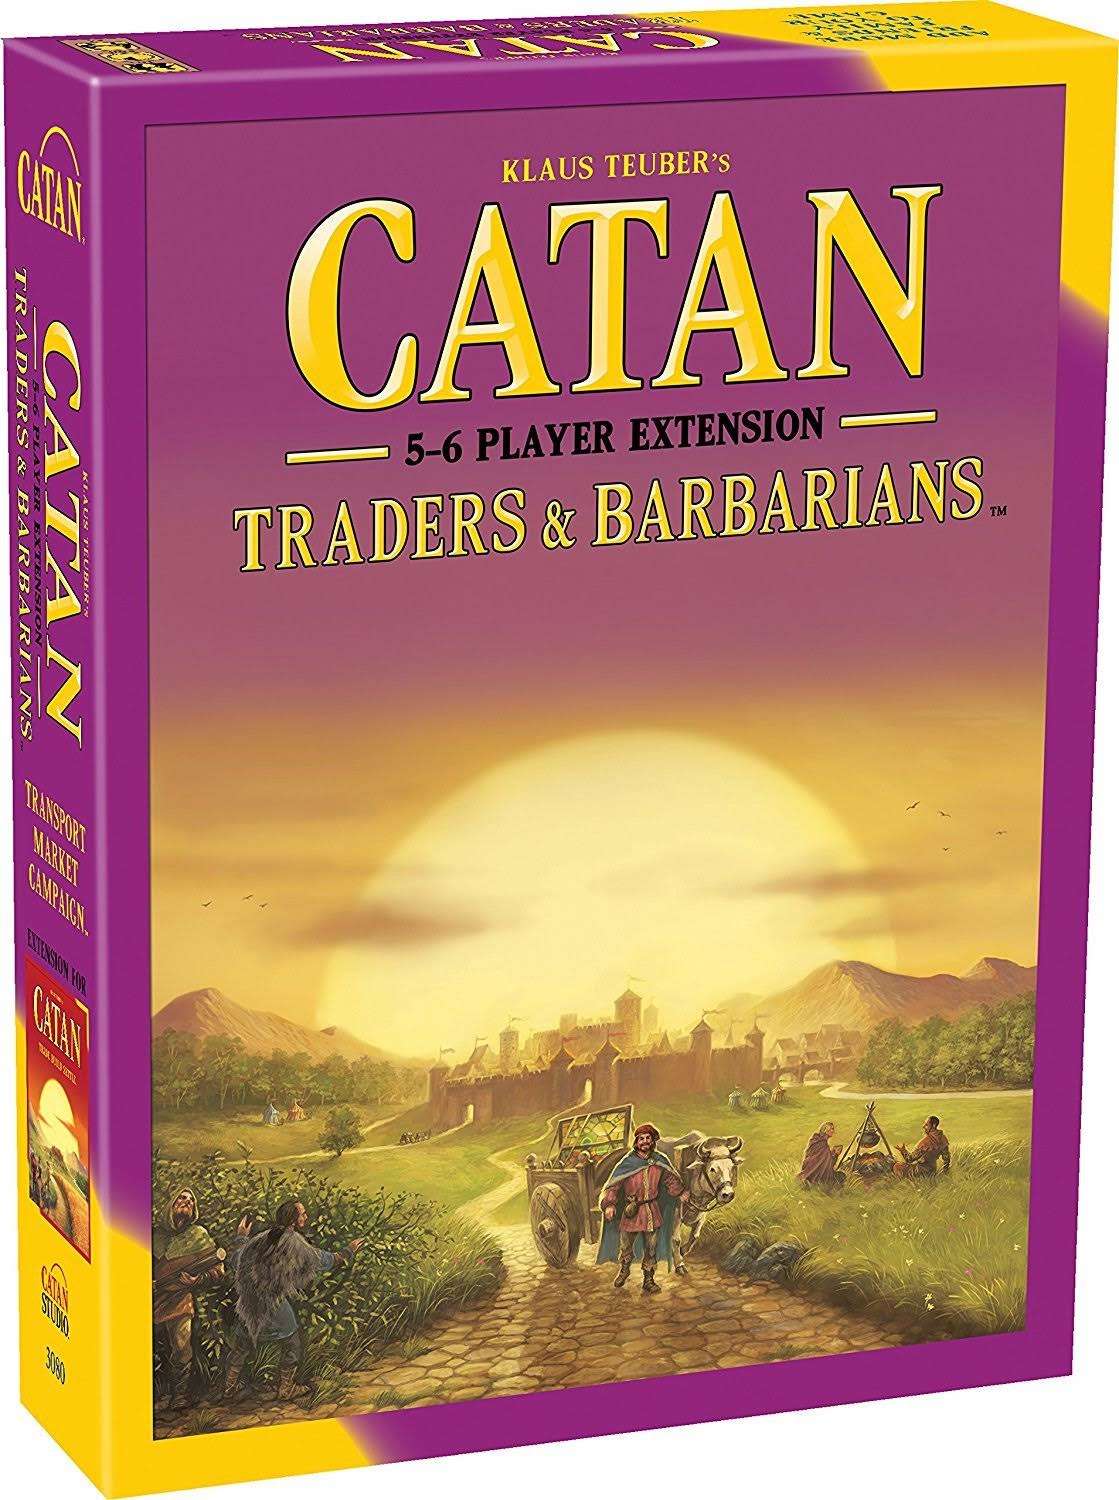 Mayfair Games Board Game Expansion - Catan Traders and Barbarians, 5-6 Player